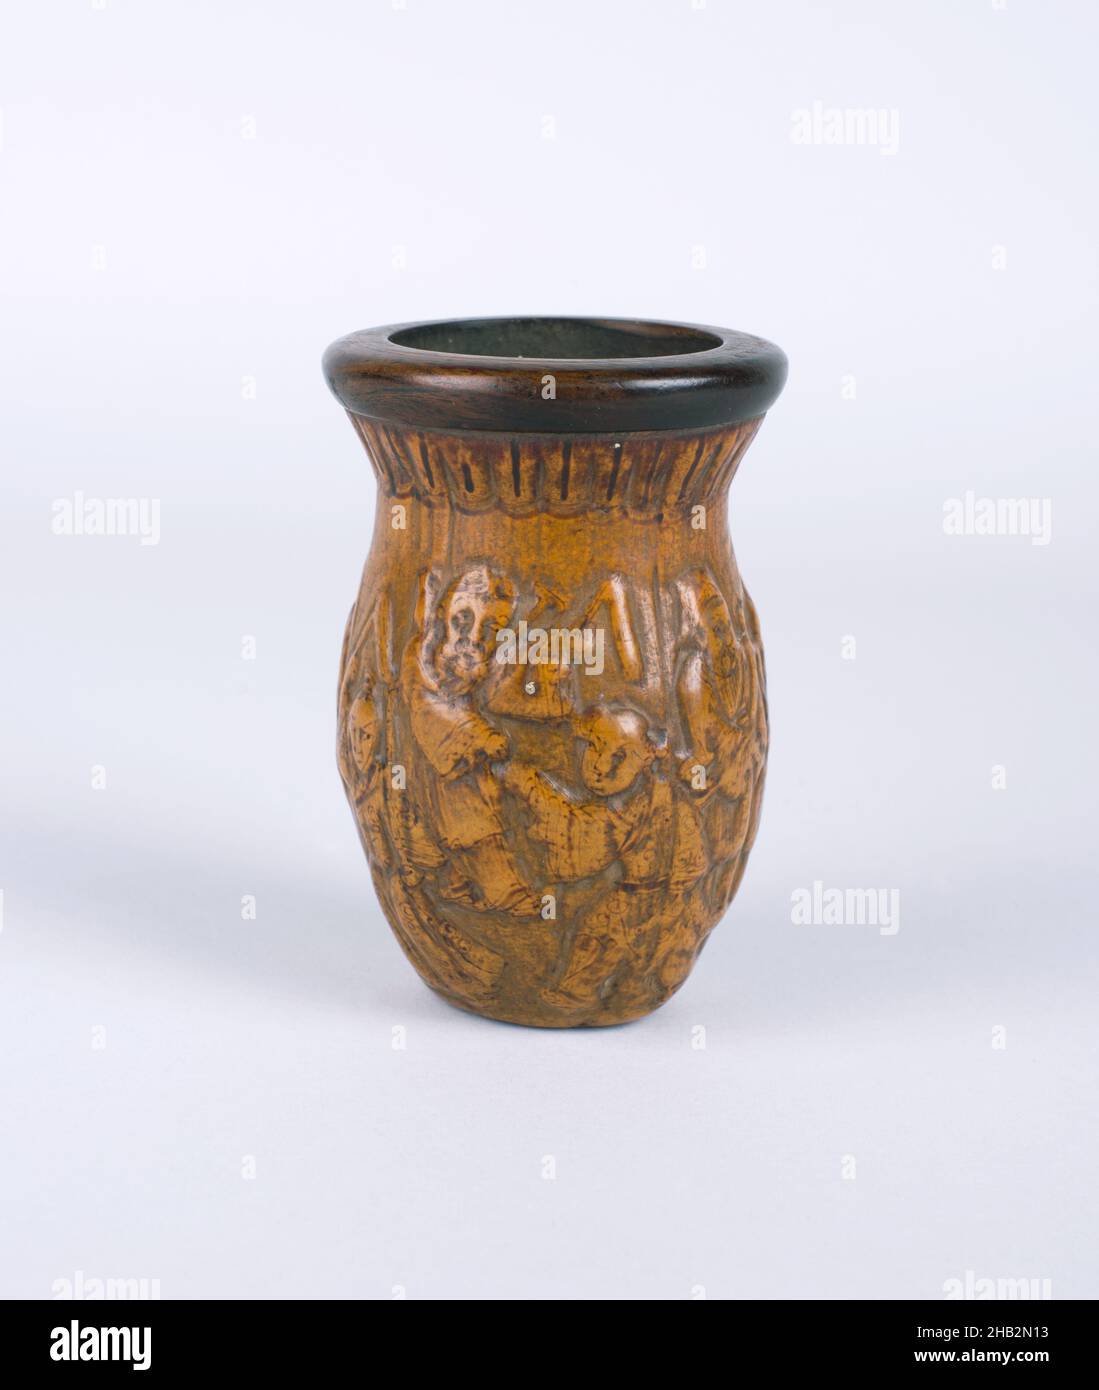 Cricket Cage with Design of Figures, Chinese, Qing dynasty, 1644–1911, 18th–19th century, Molded gourd with wood rim, Made in China, Asia, Recreational artifacts, wood, height: 3 7/8 in. (9.8 cm Stock Photo